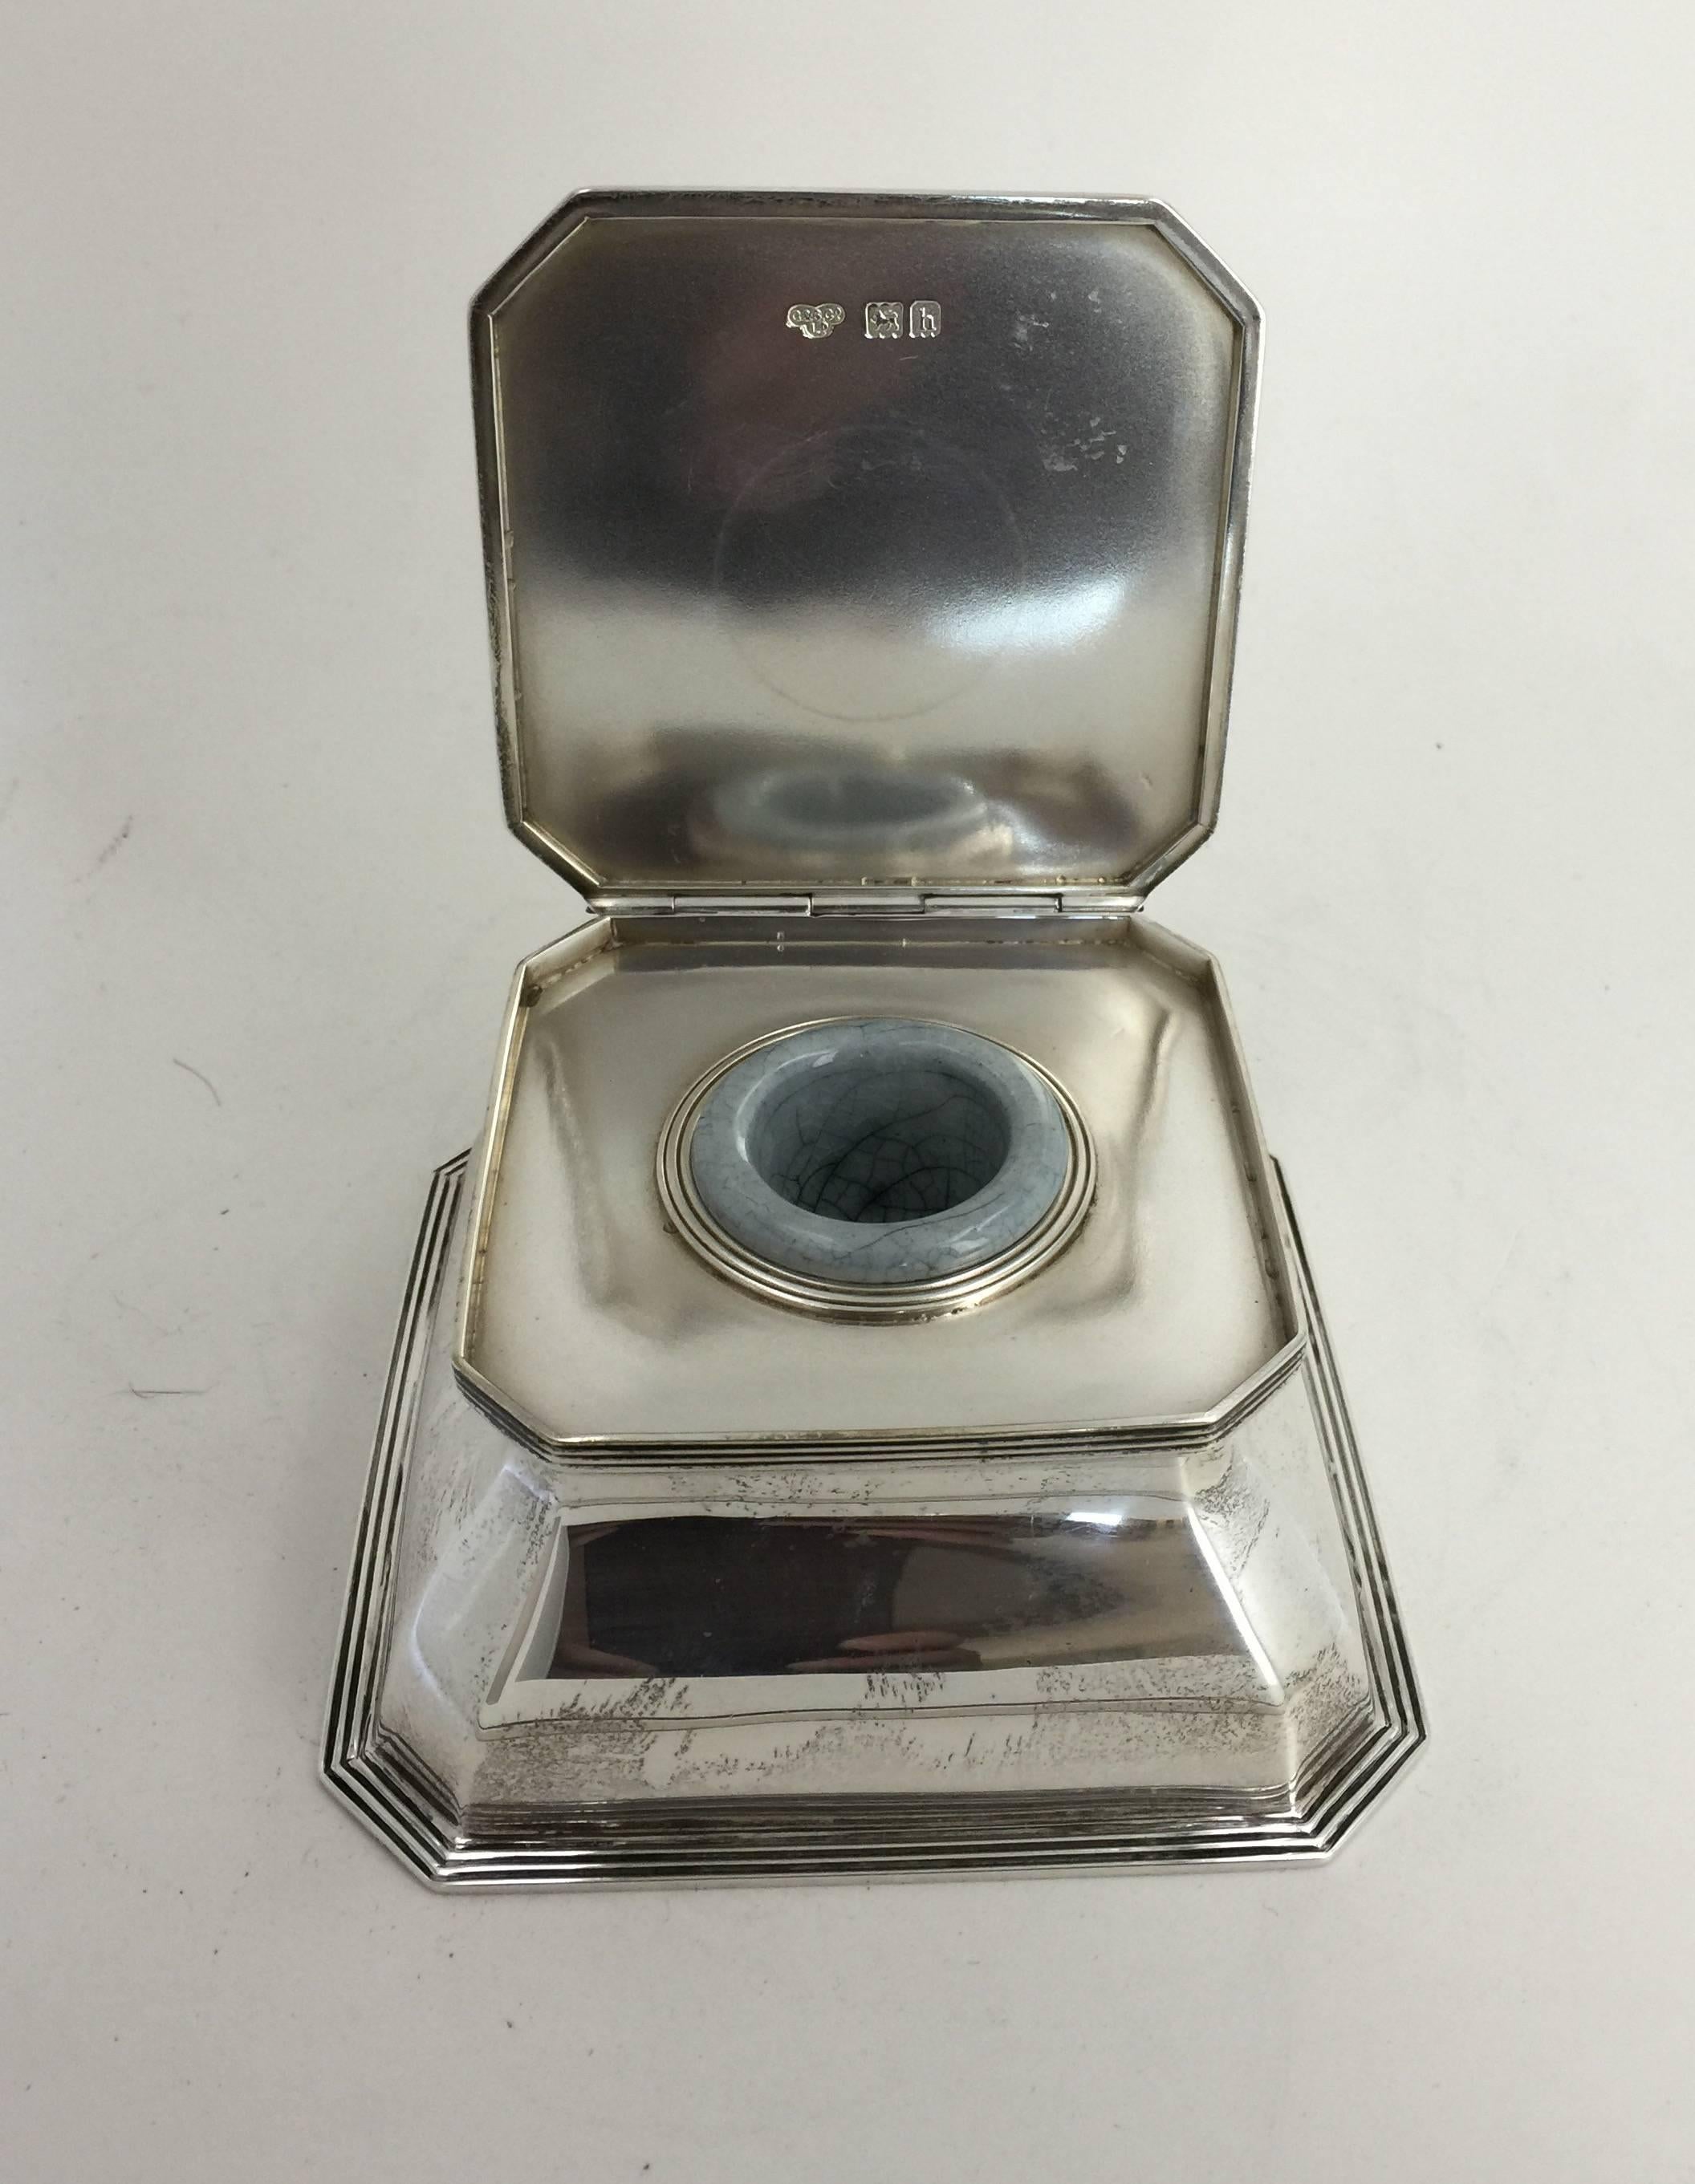 The rectangular inkwell with flat hinged lid, opening to reveal ceramic well and cut-glass liner beneath. Hallmarks on inside cover, rear and underside.